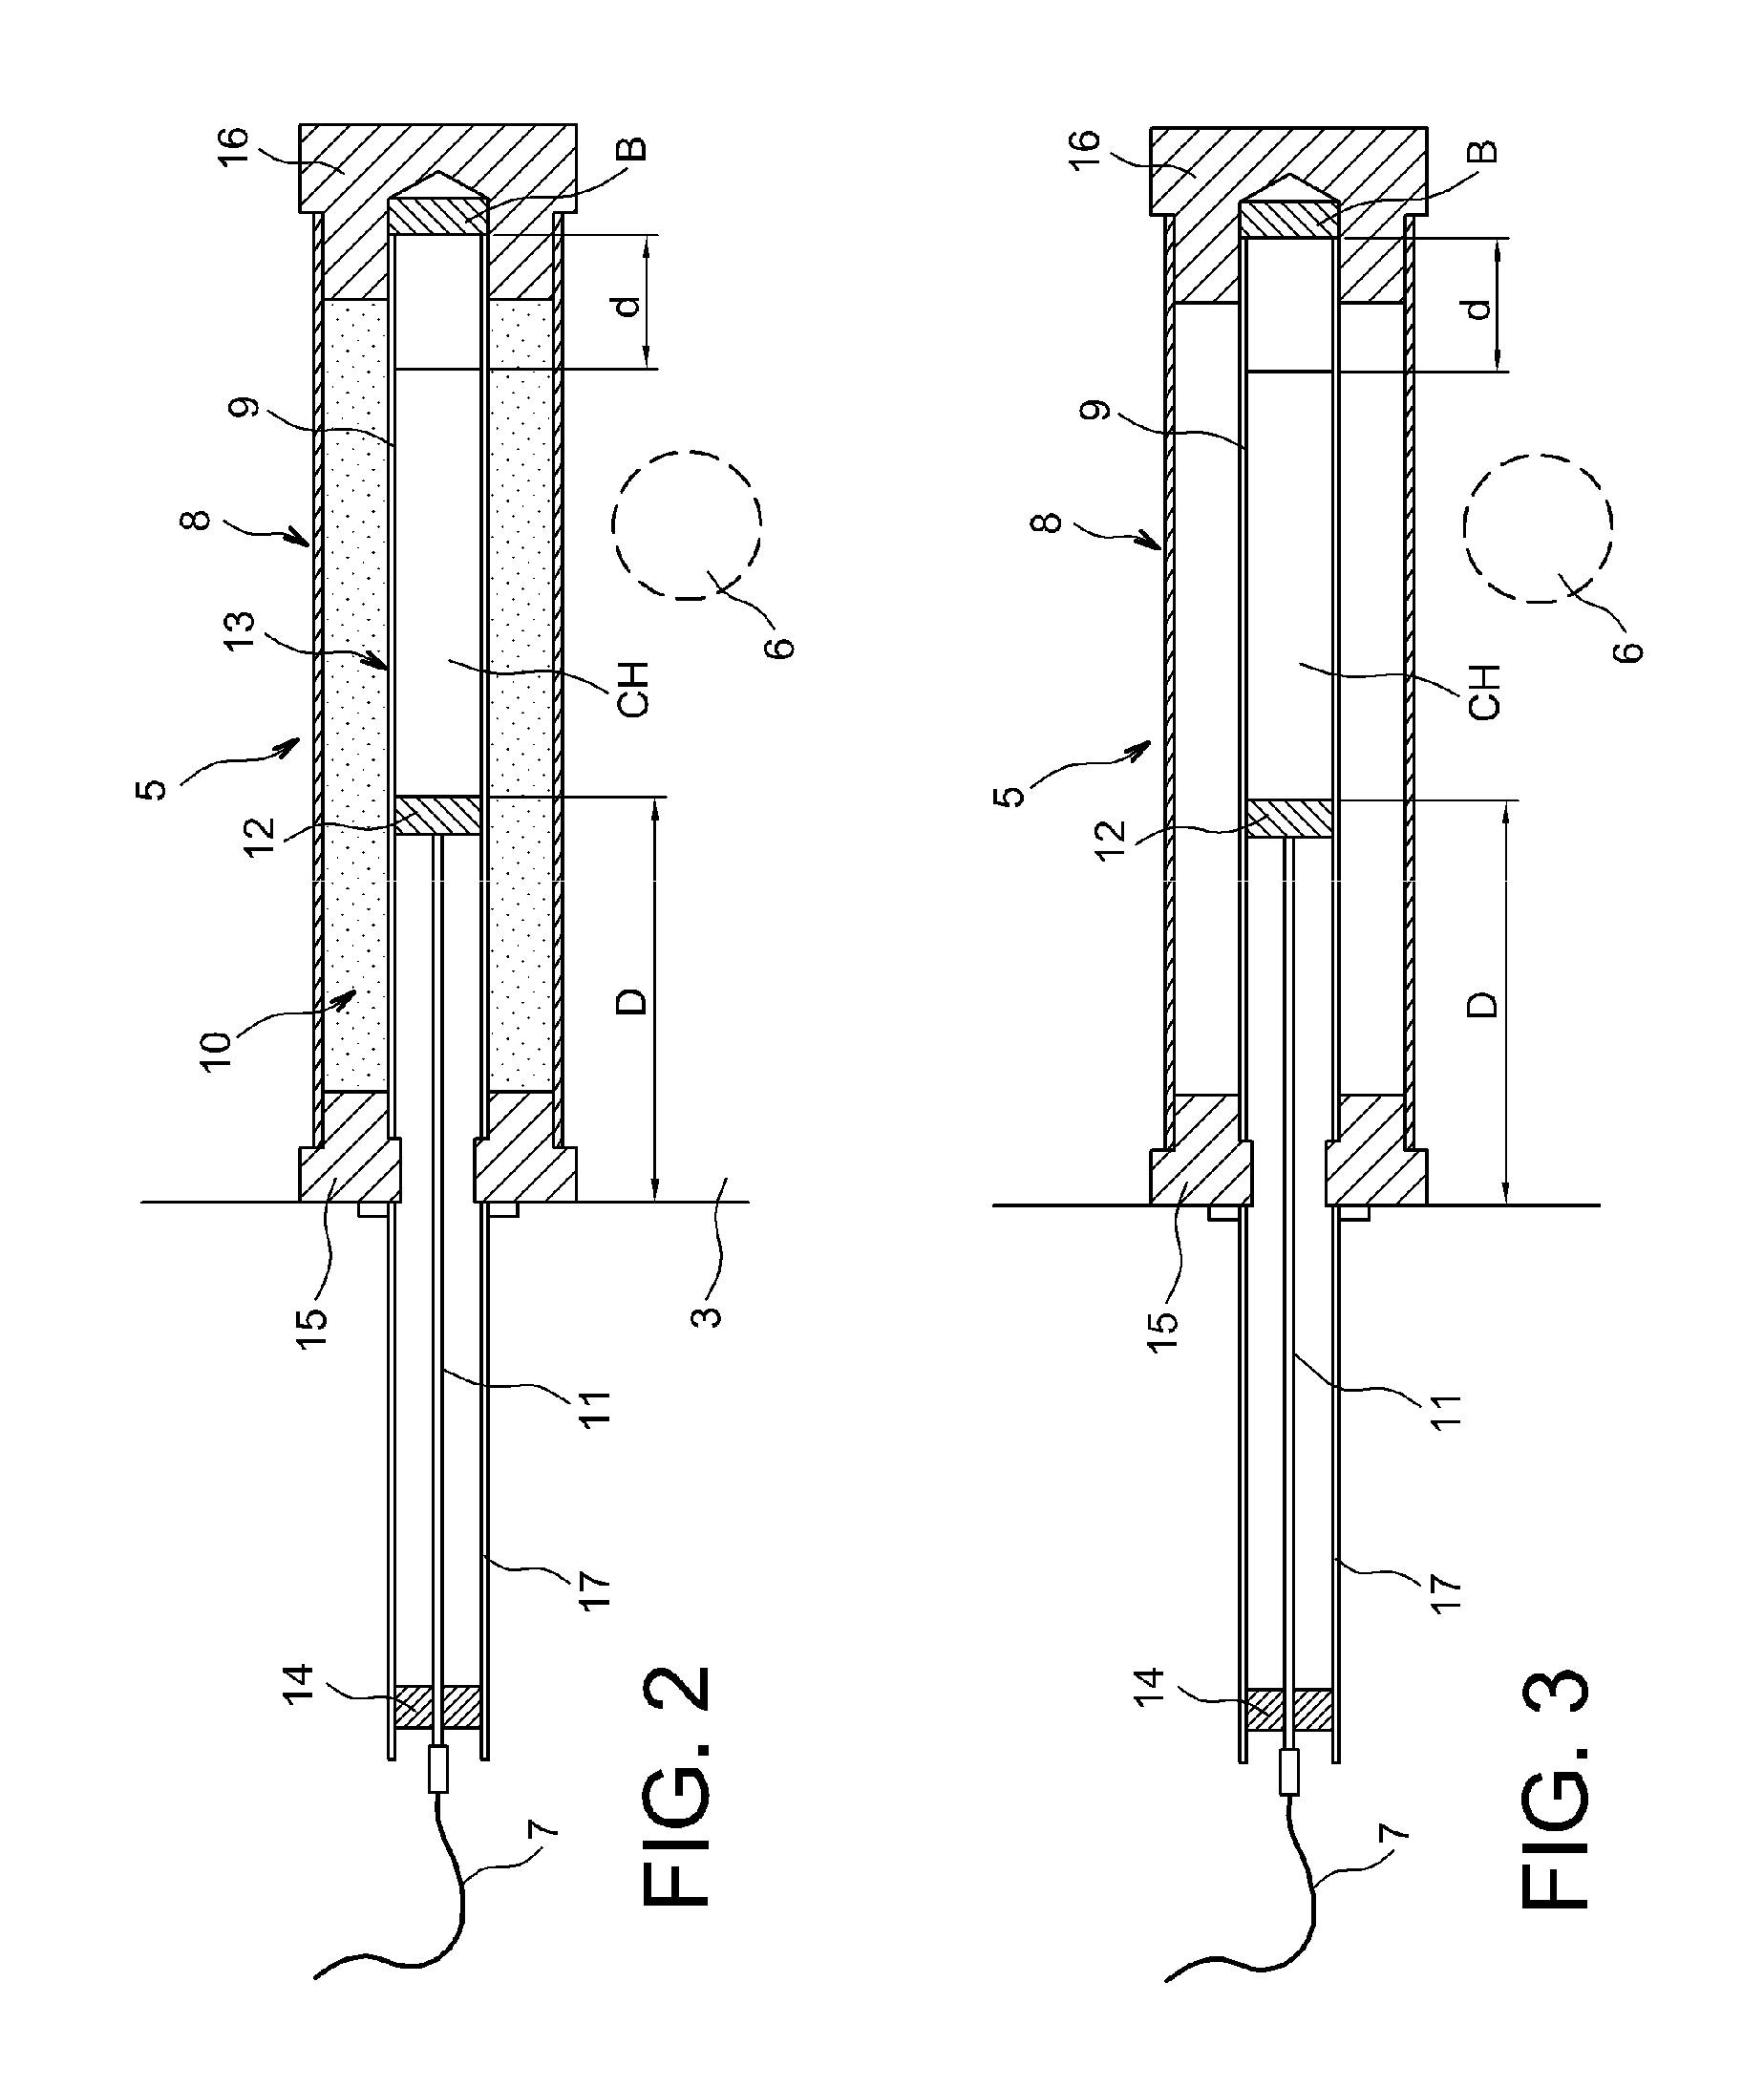 Method to process fission chamber measurement signals